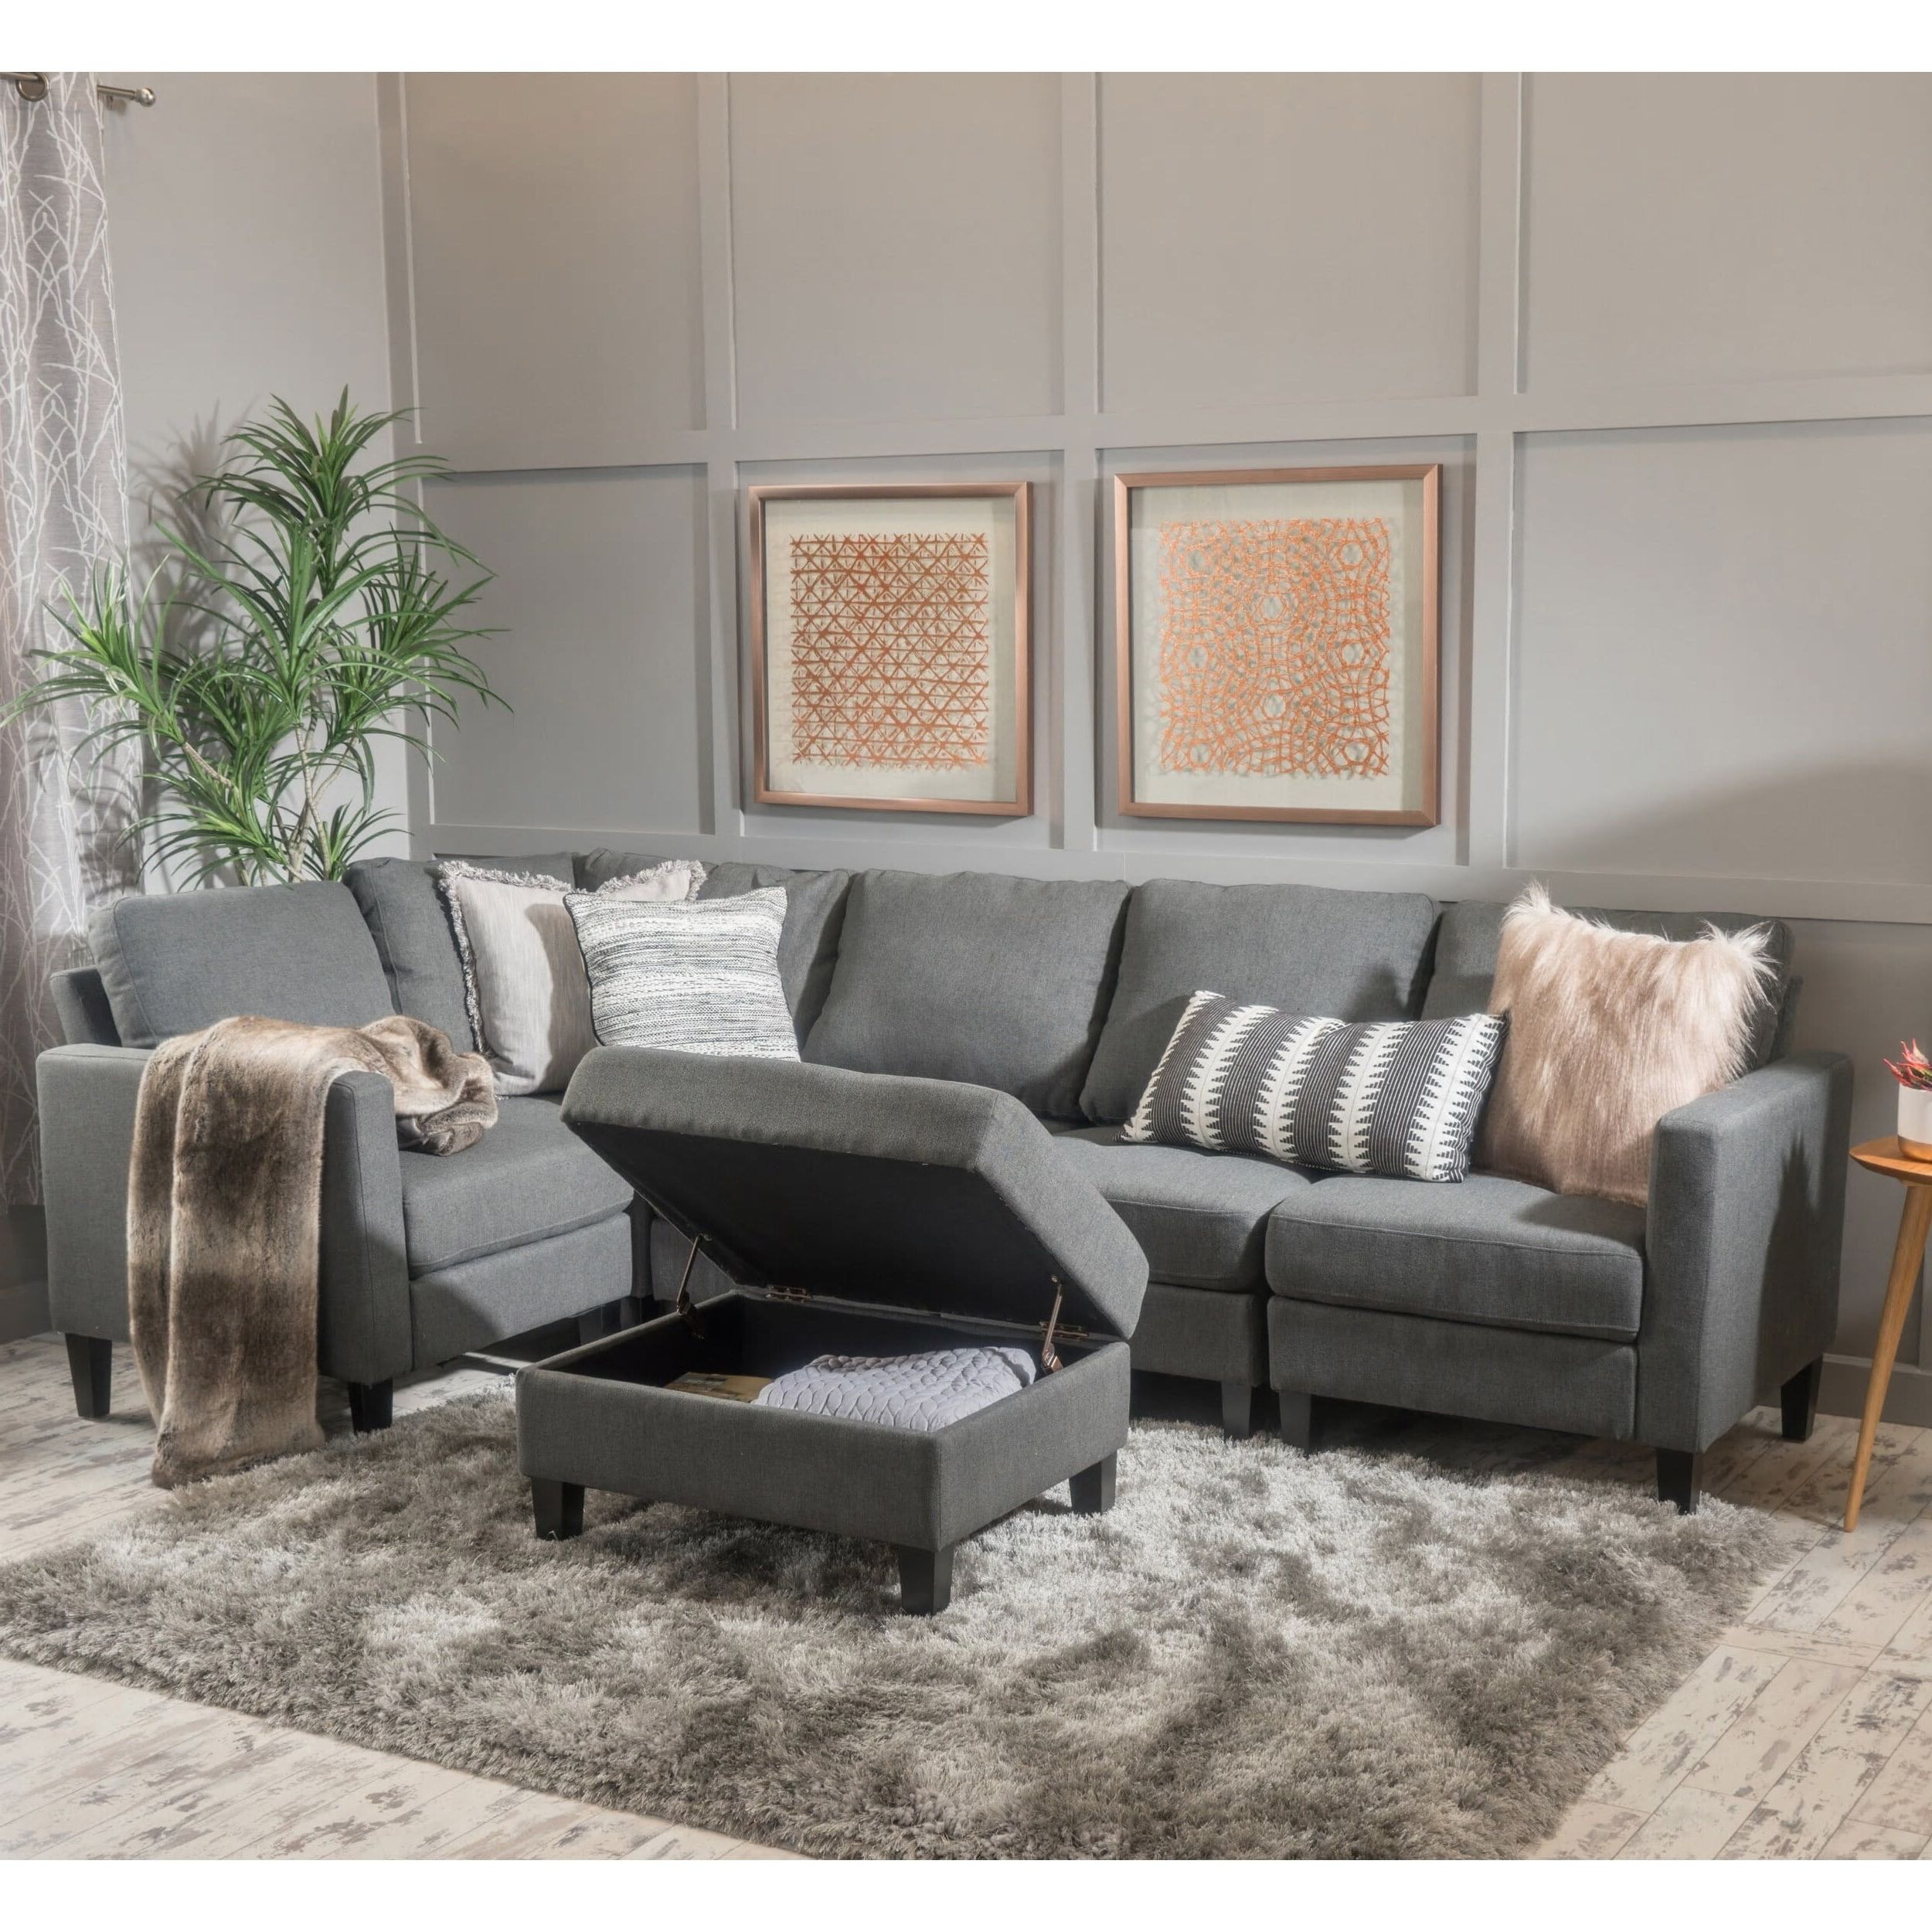 Christopher Knight Home Zahra 6 Piece Sofa Sectional With Storage With Sofas With Ottomans (View 5 of 20)